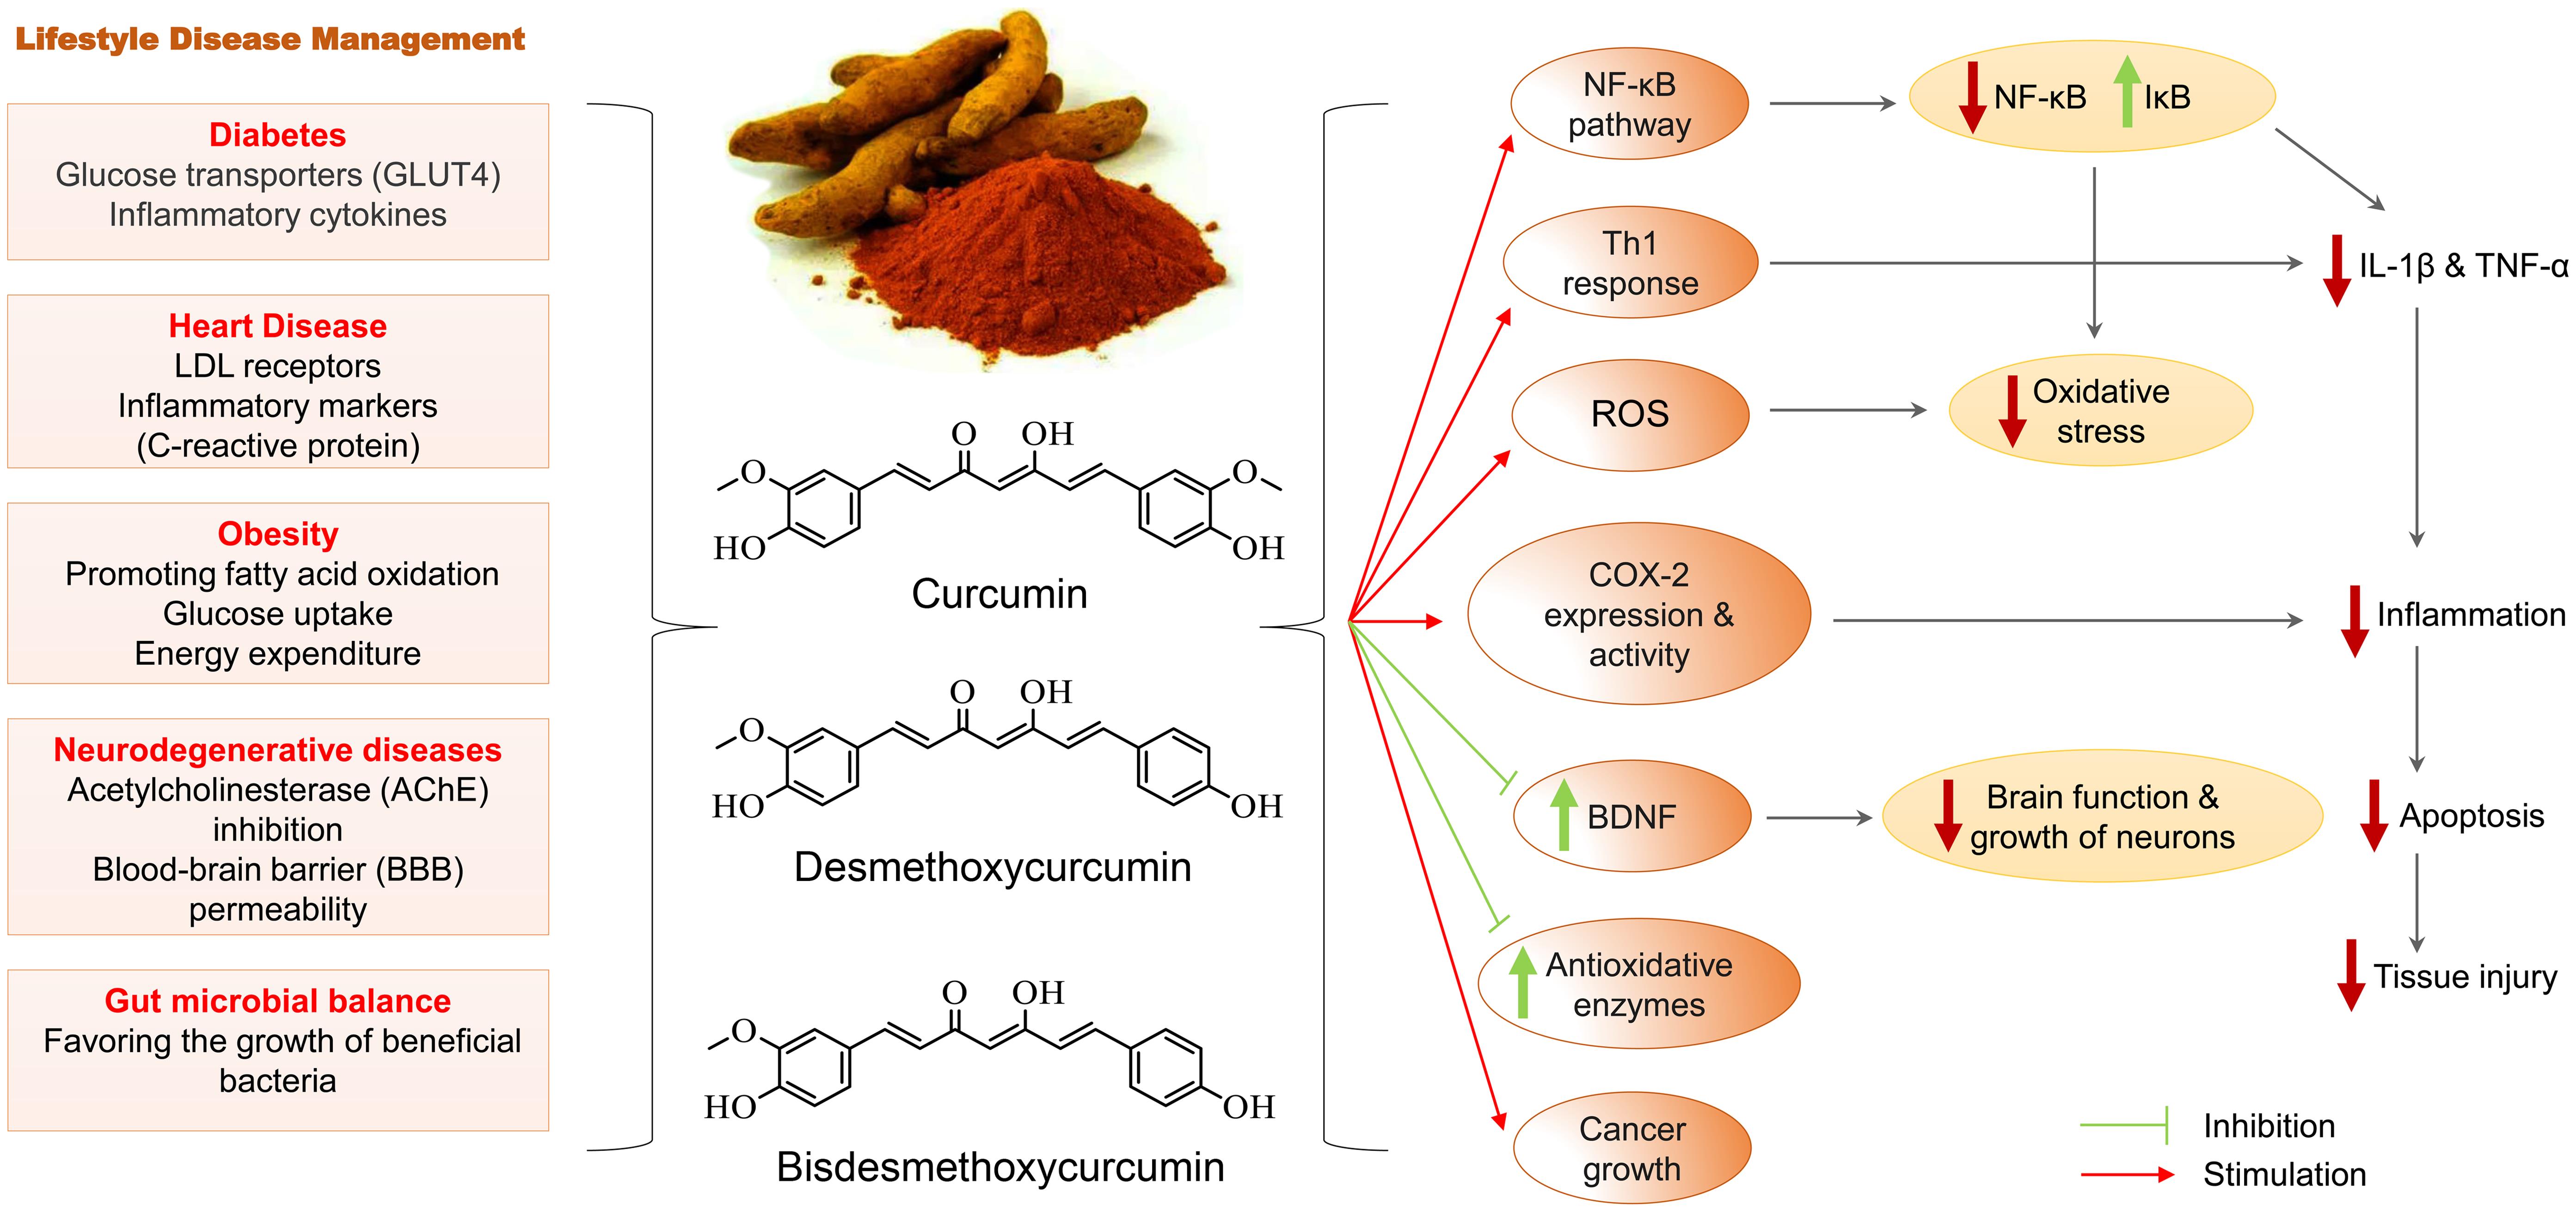 Molecular targets and impact of turmeric on lifestyle diseases.